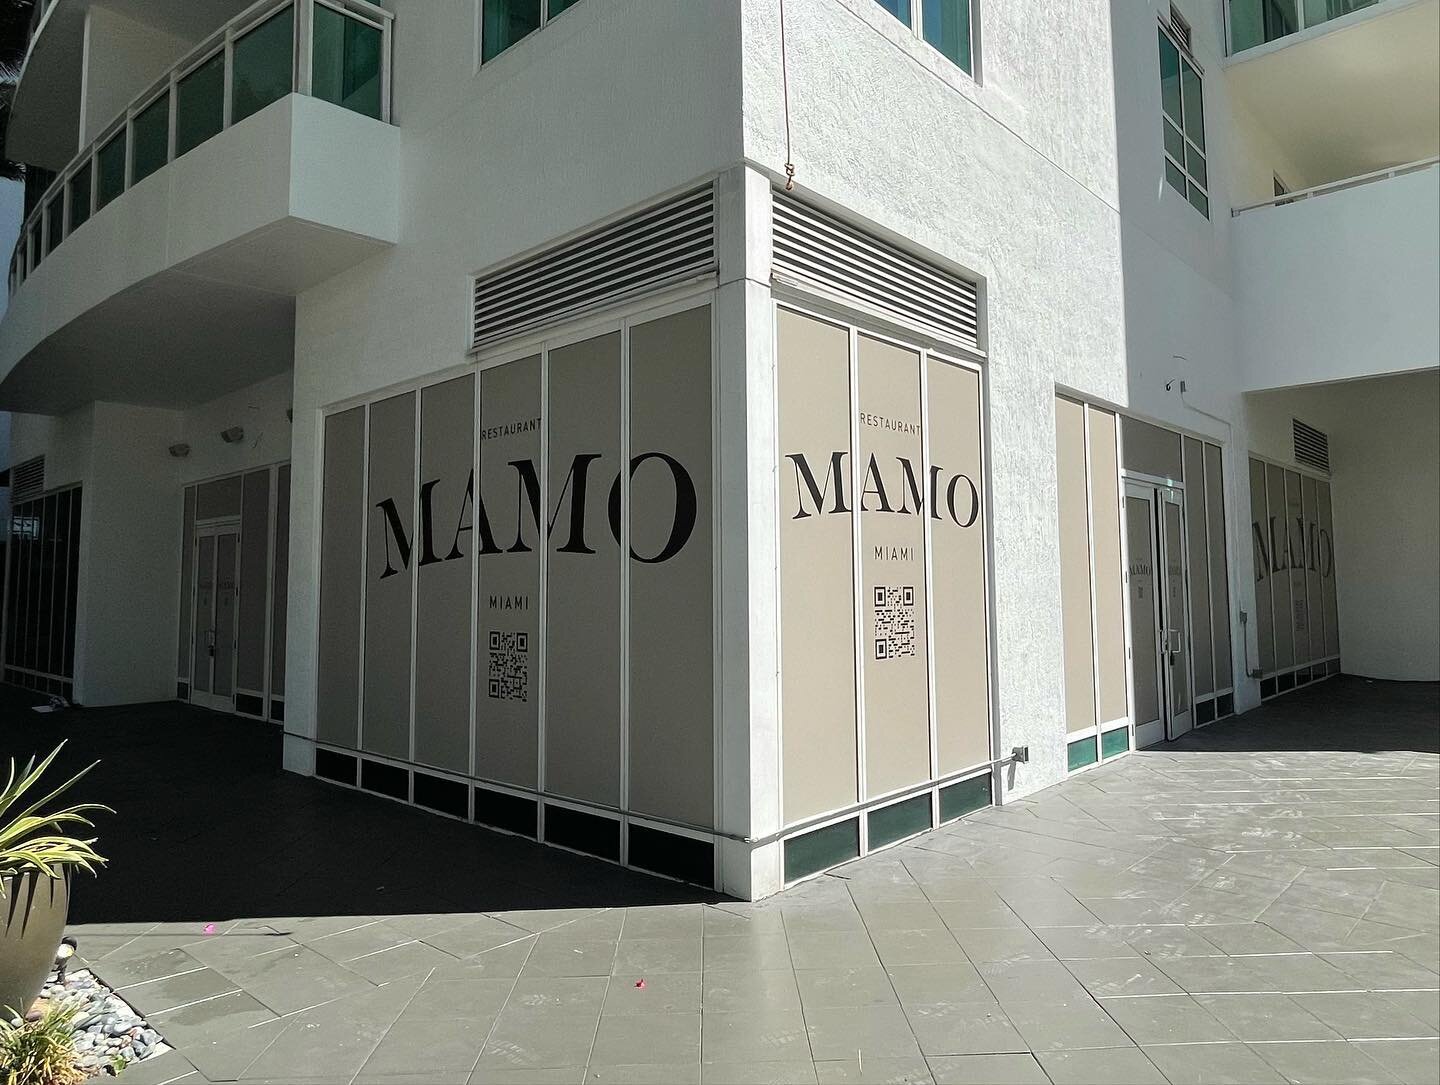 The Mamo Group temporary windows graphics for their Brickell location. Tons more to come for this project. #solguardindustries #solguard